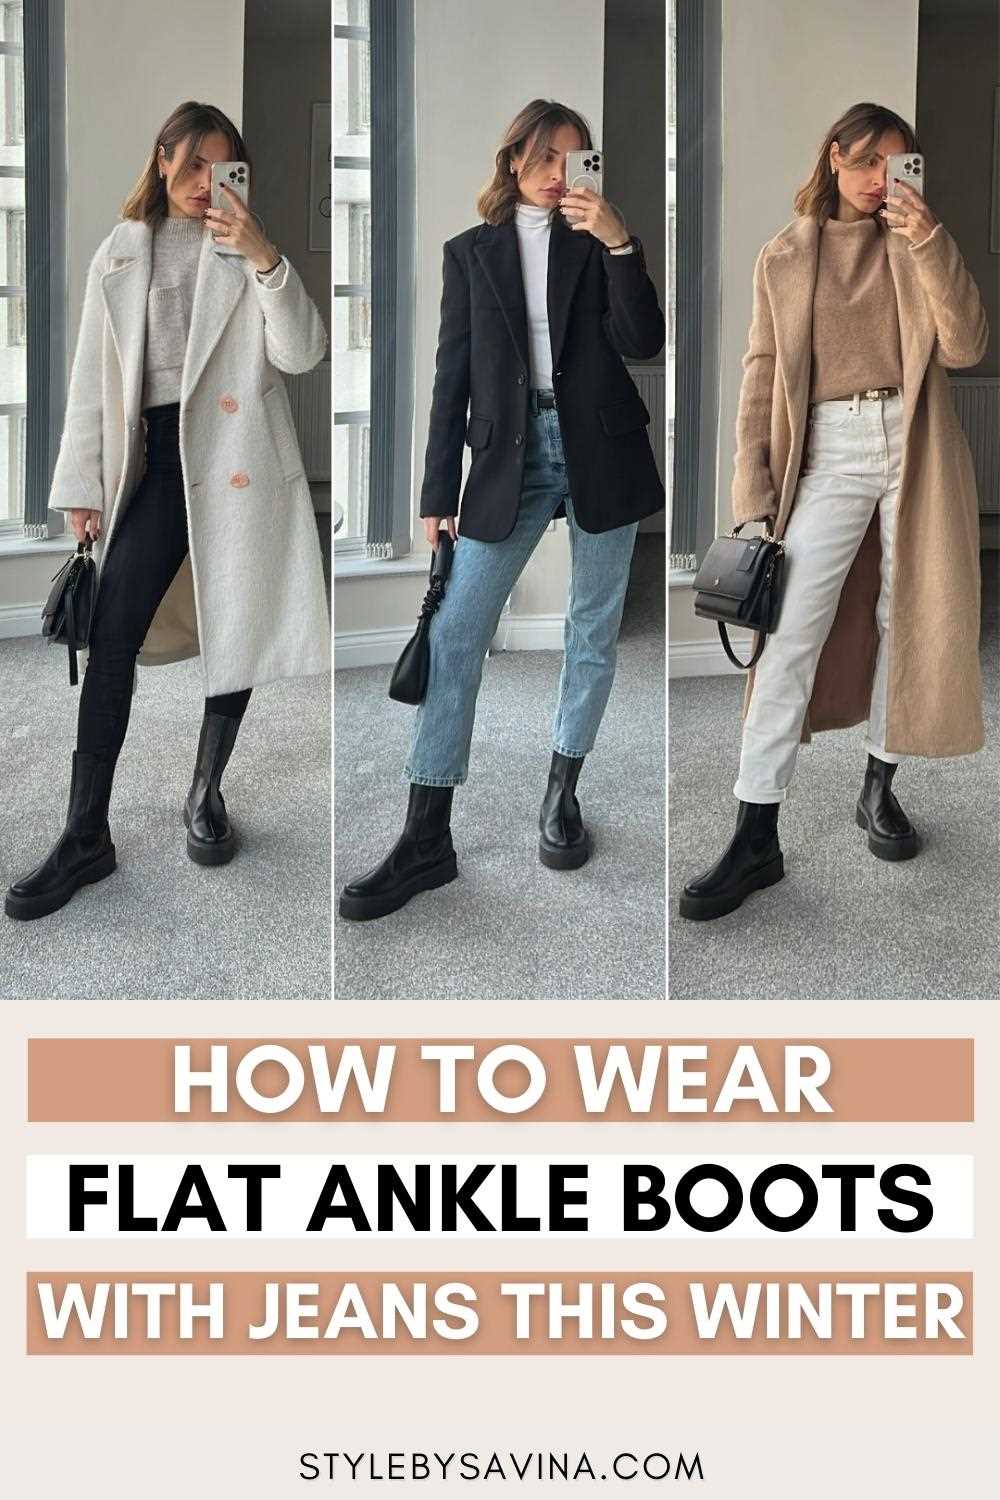 Balancing Outfit Proportions with Low Boots and Wide-Leg Jeans